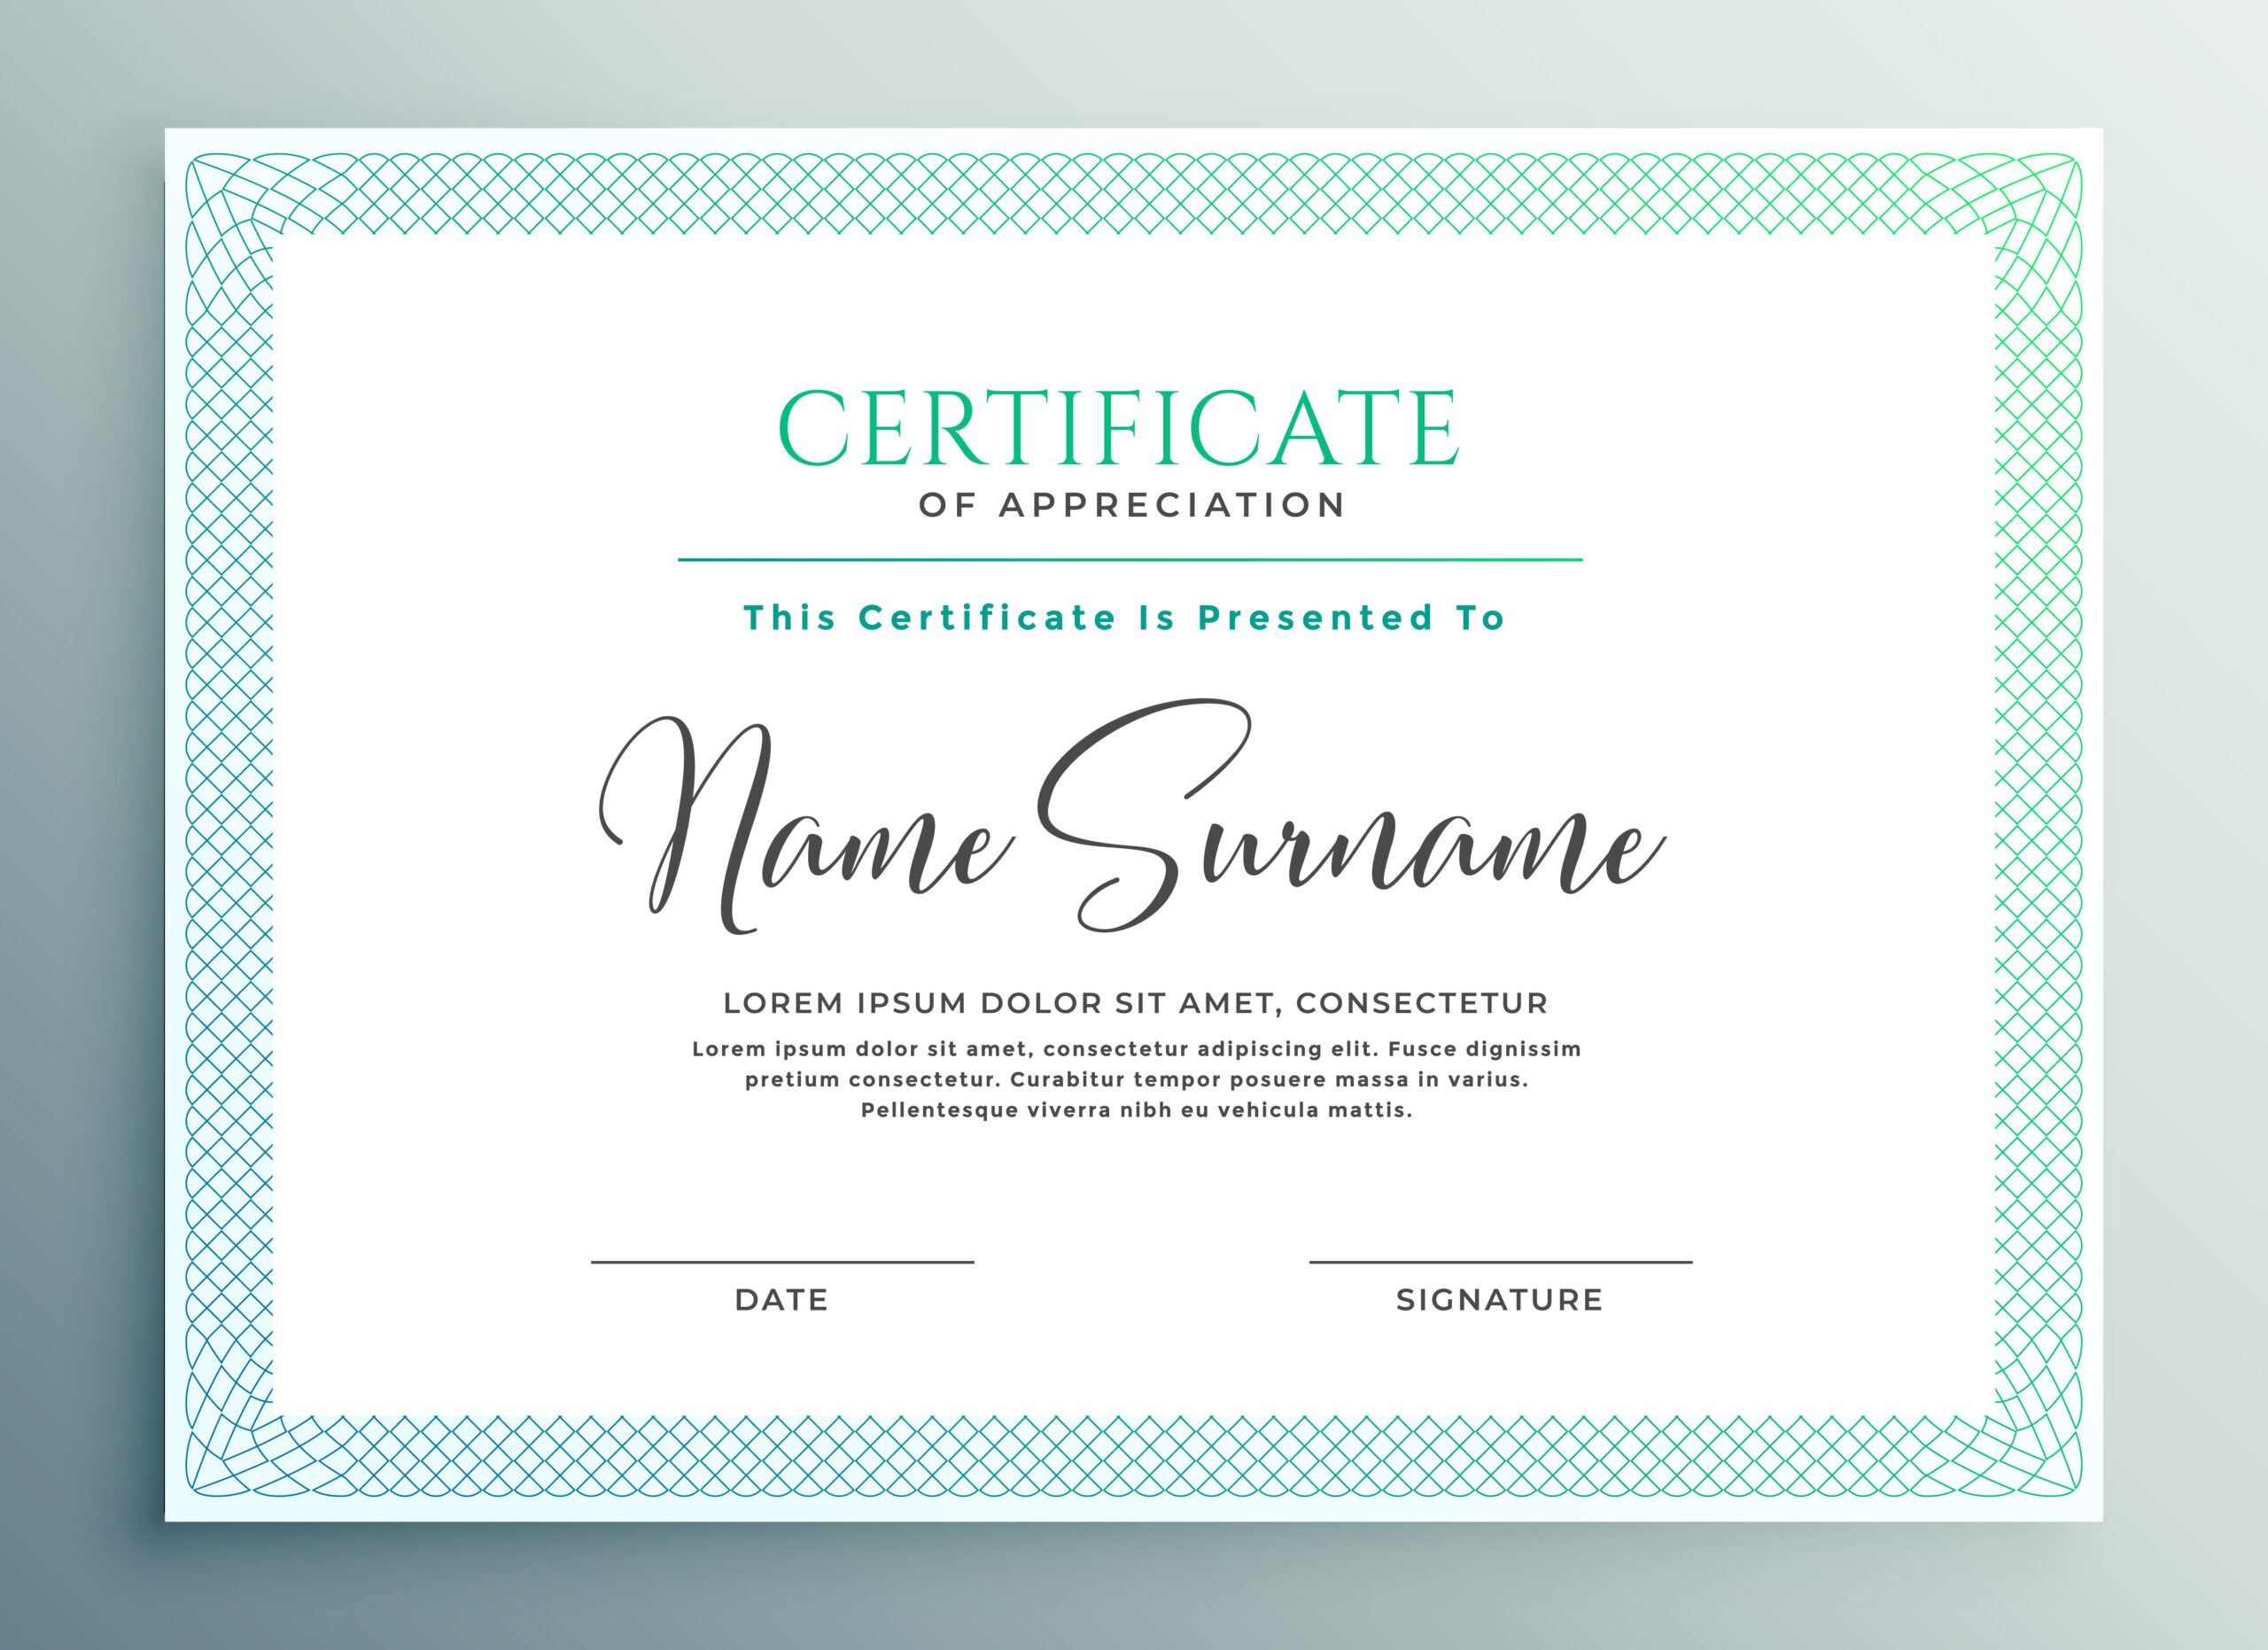 Certificate Of Appreciation Template Design - Download Free Vector Art with regard to Downloadable Certificate Of Recognition Templates